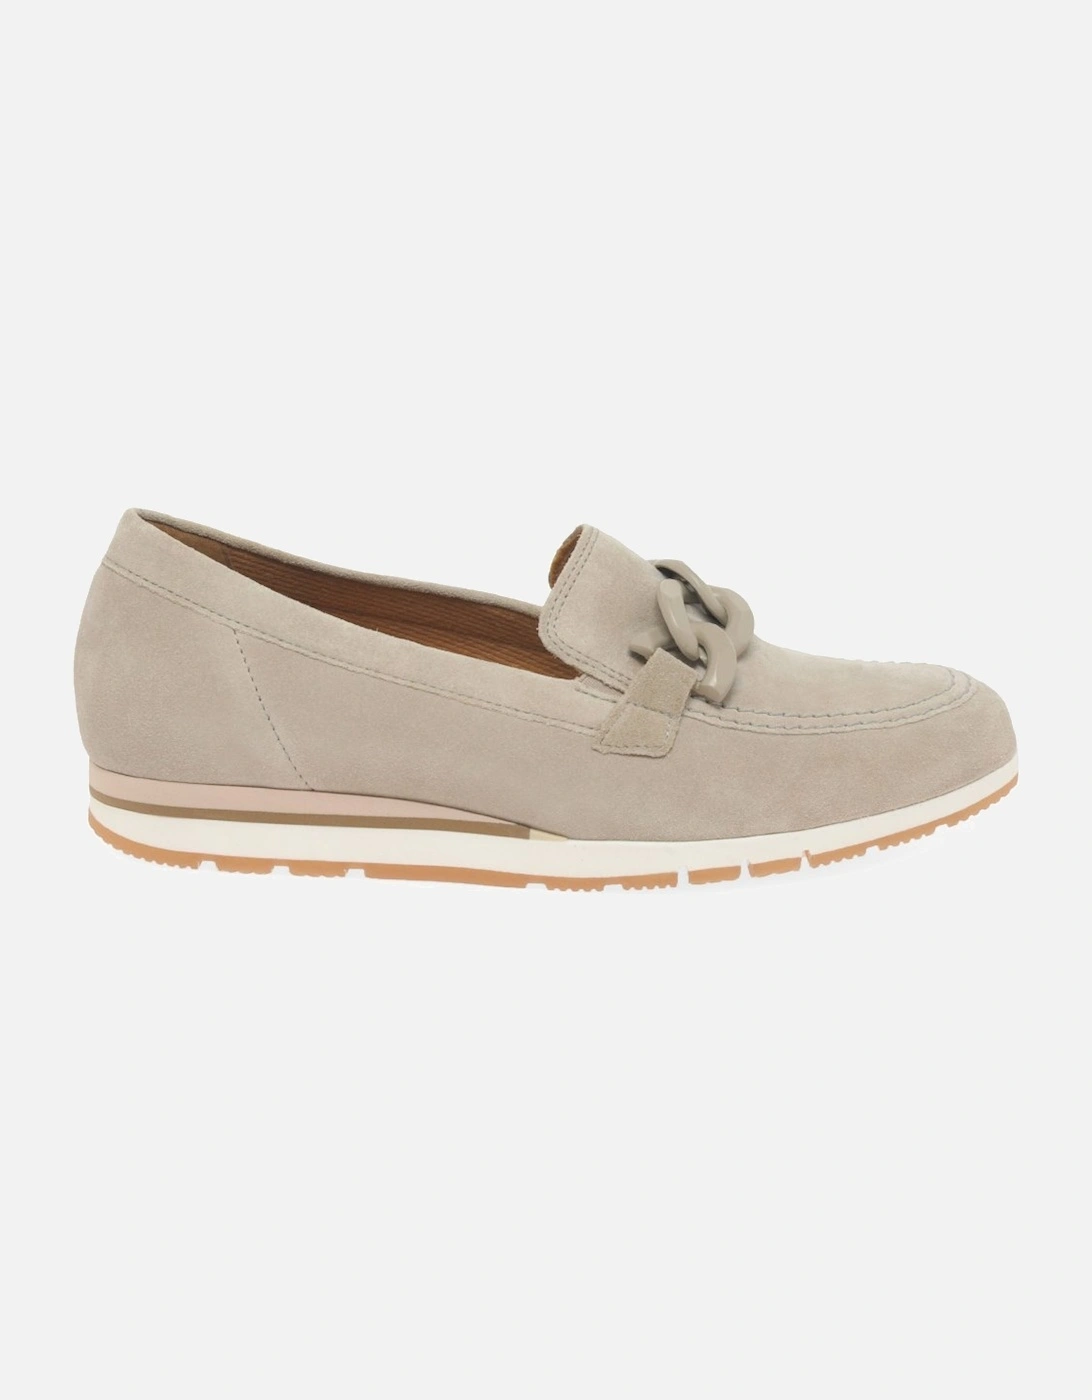 Bea Womens Loafers